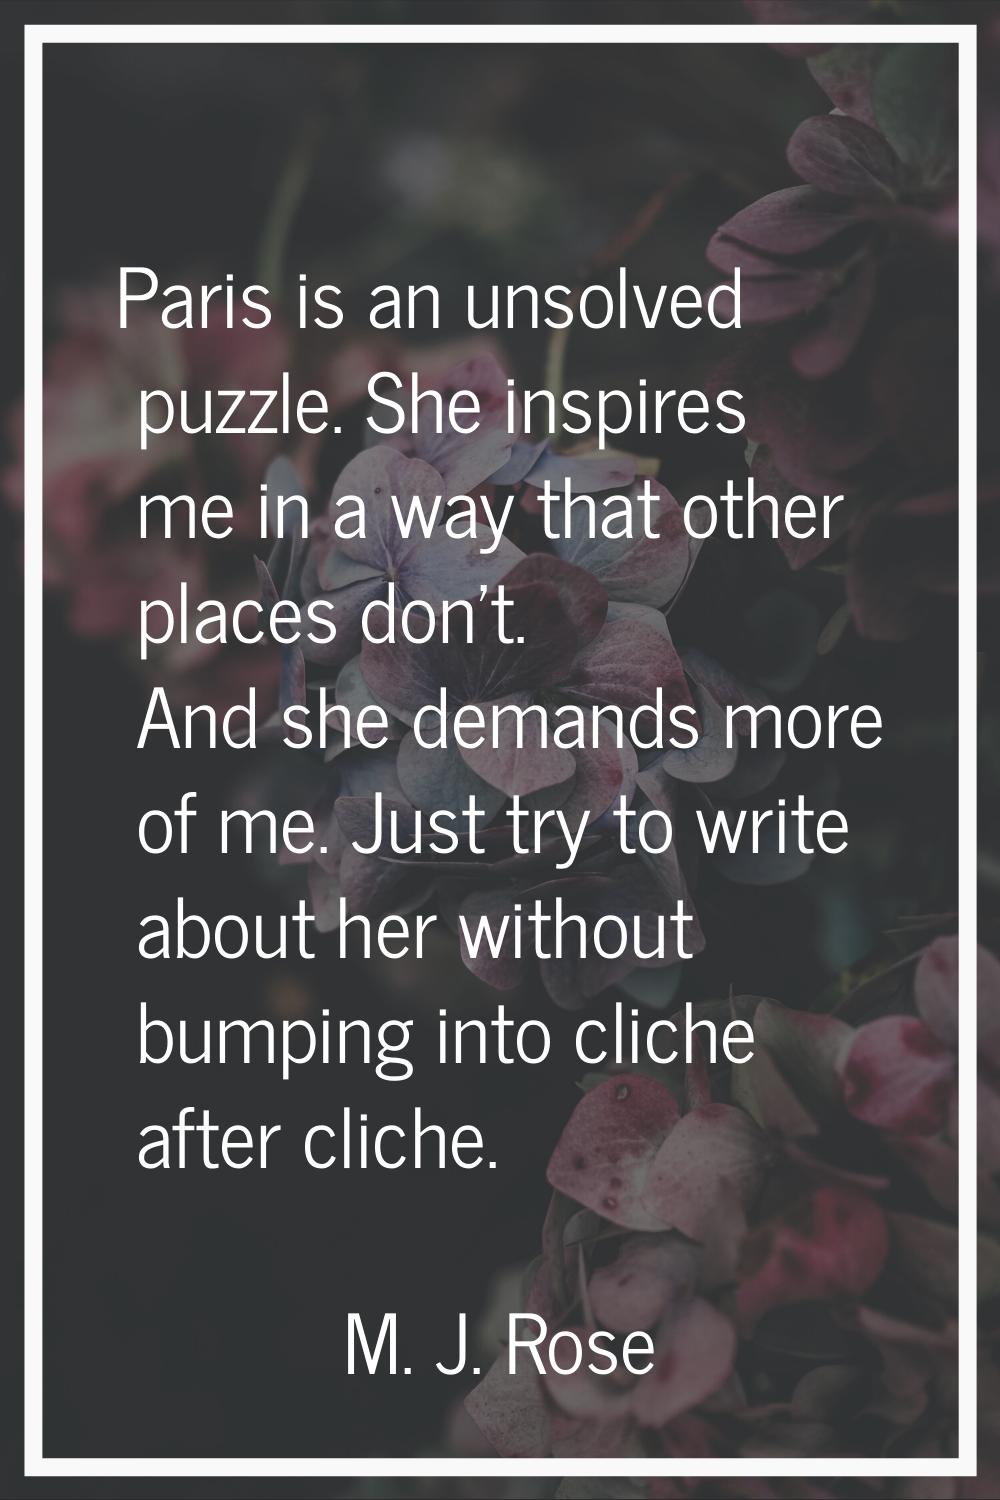 Paris is an unsolved puzzle. She inspires me in a way that other places don't. And she demands more